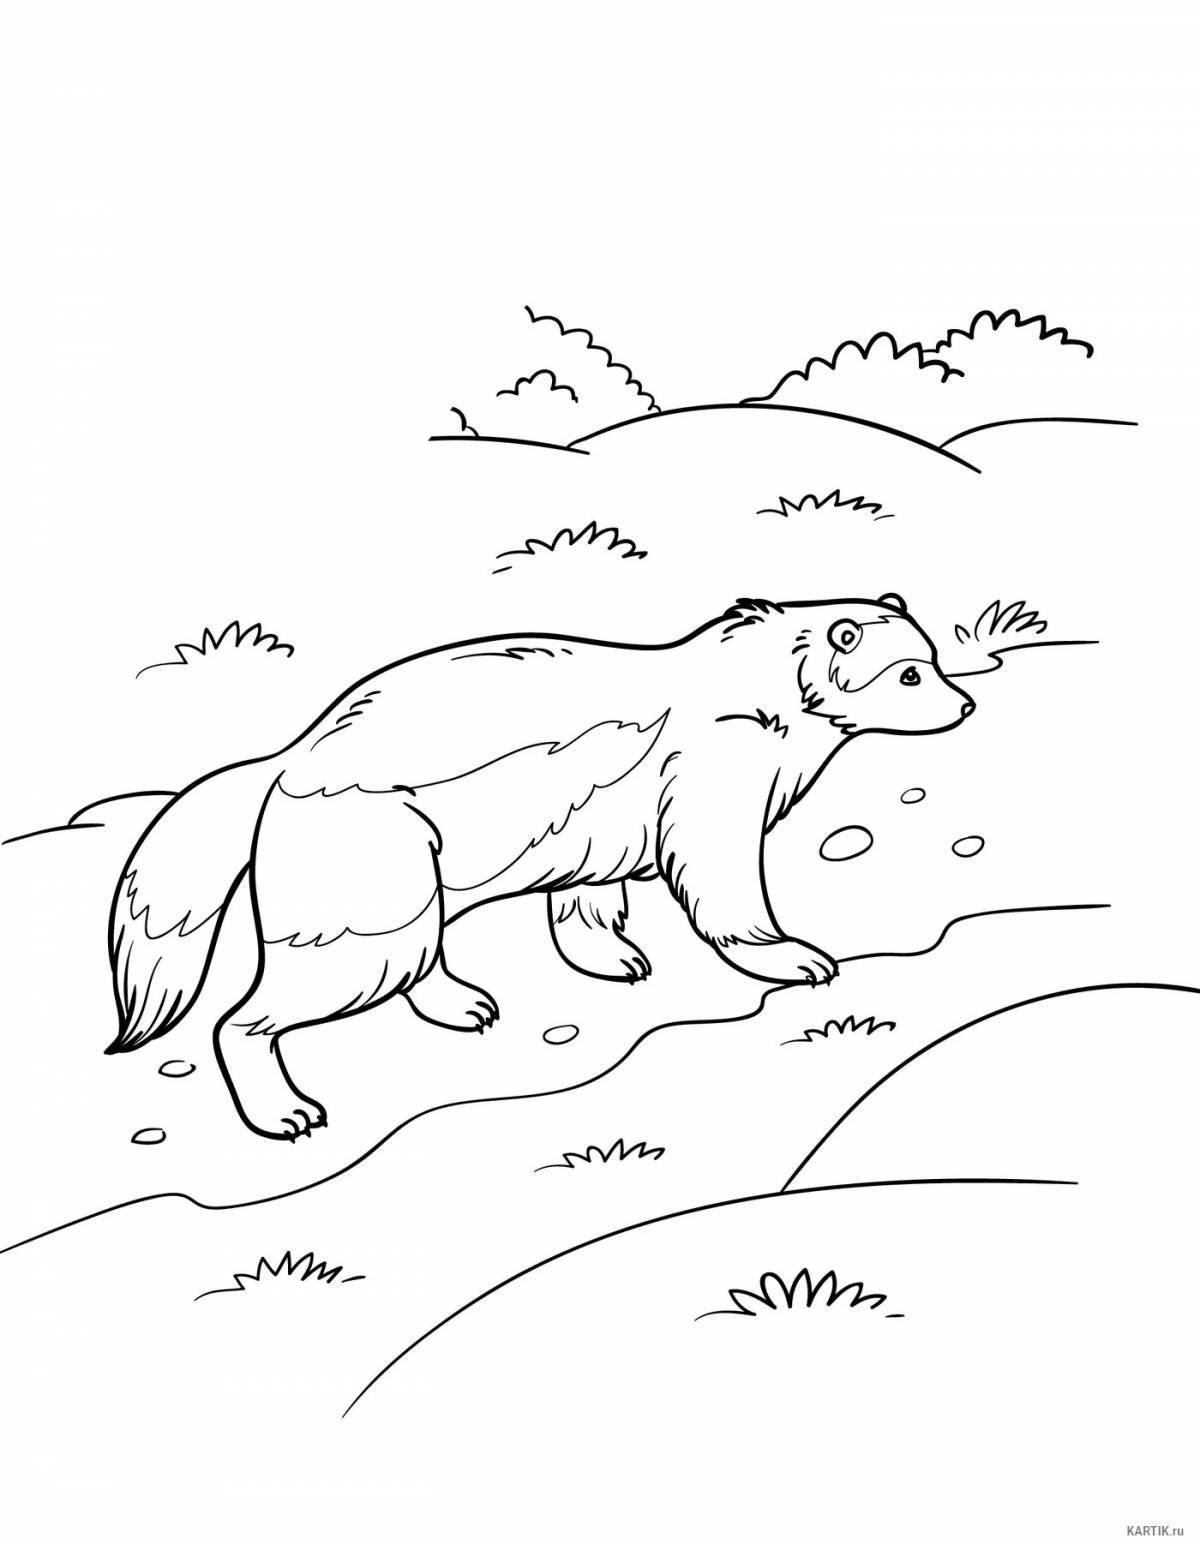 Wolverine animal coloring book for kids